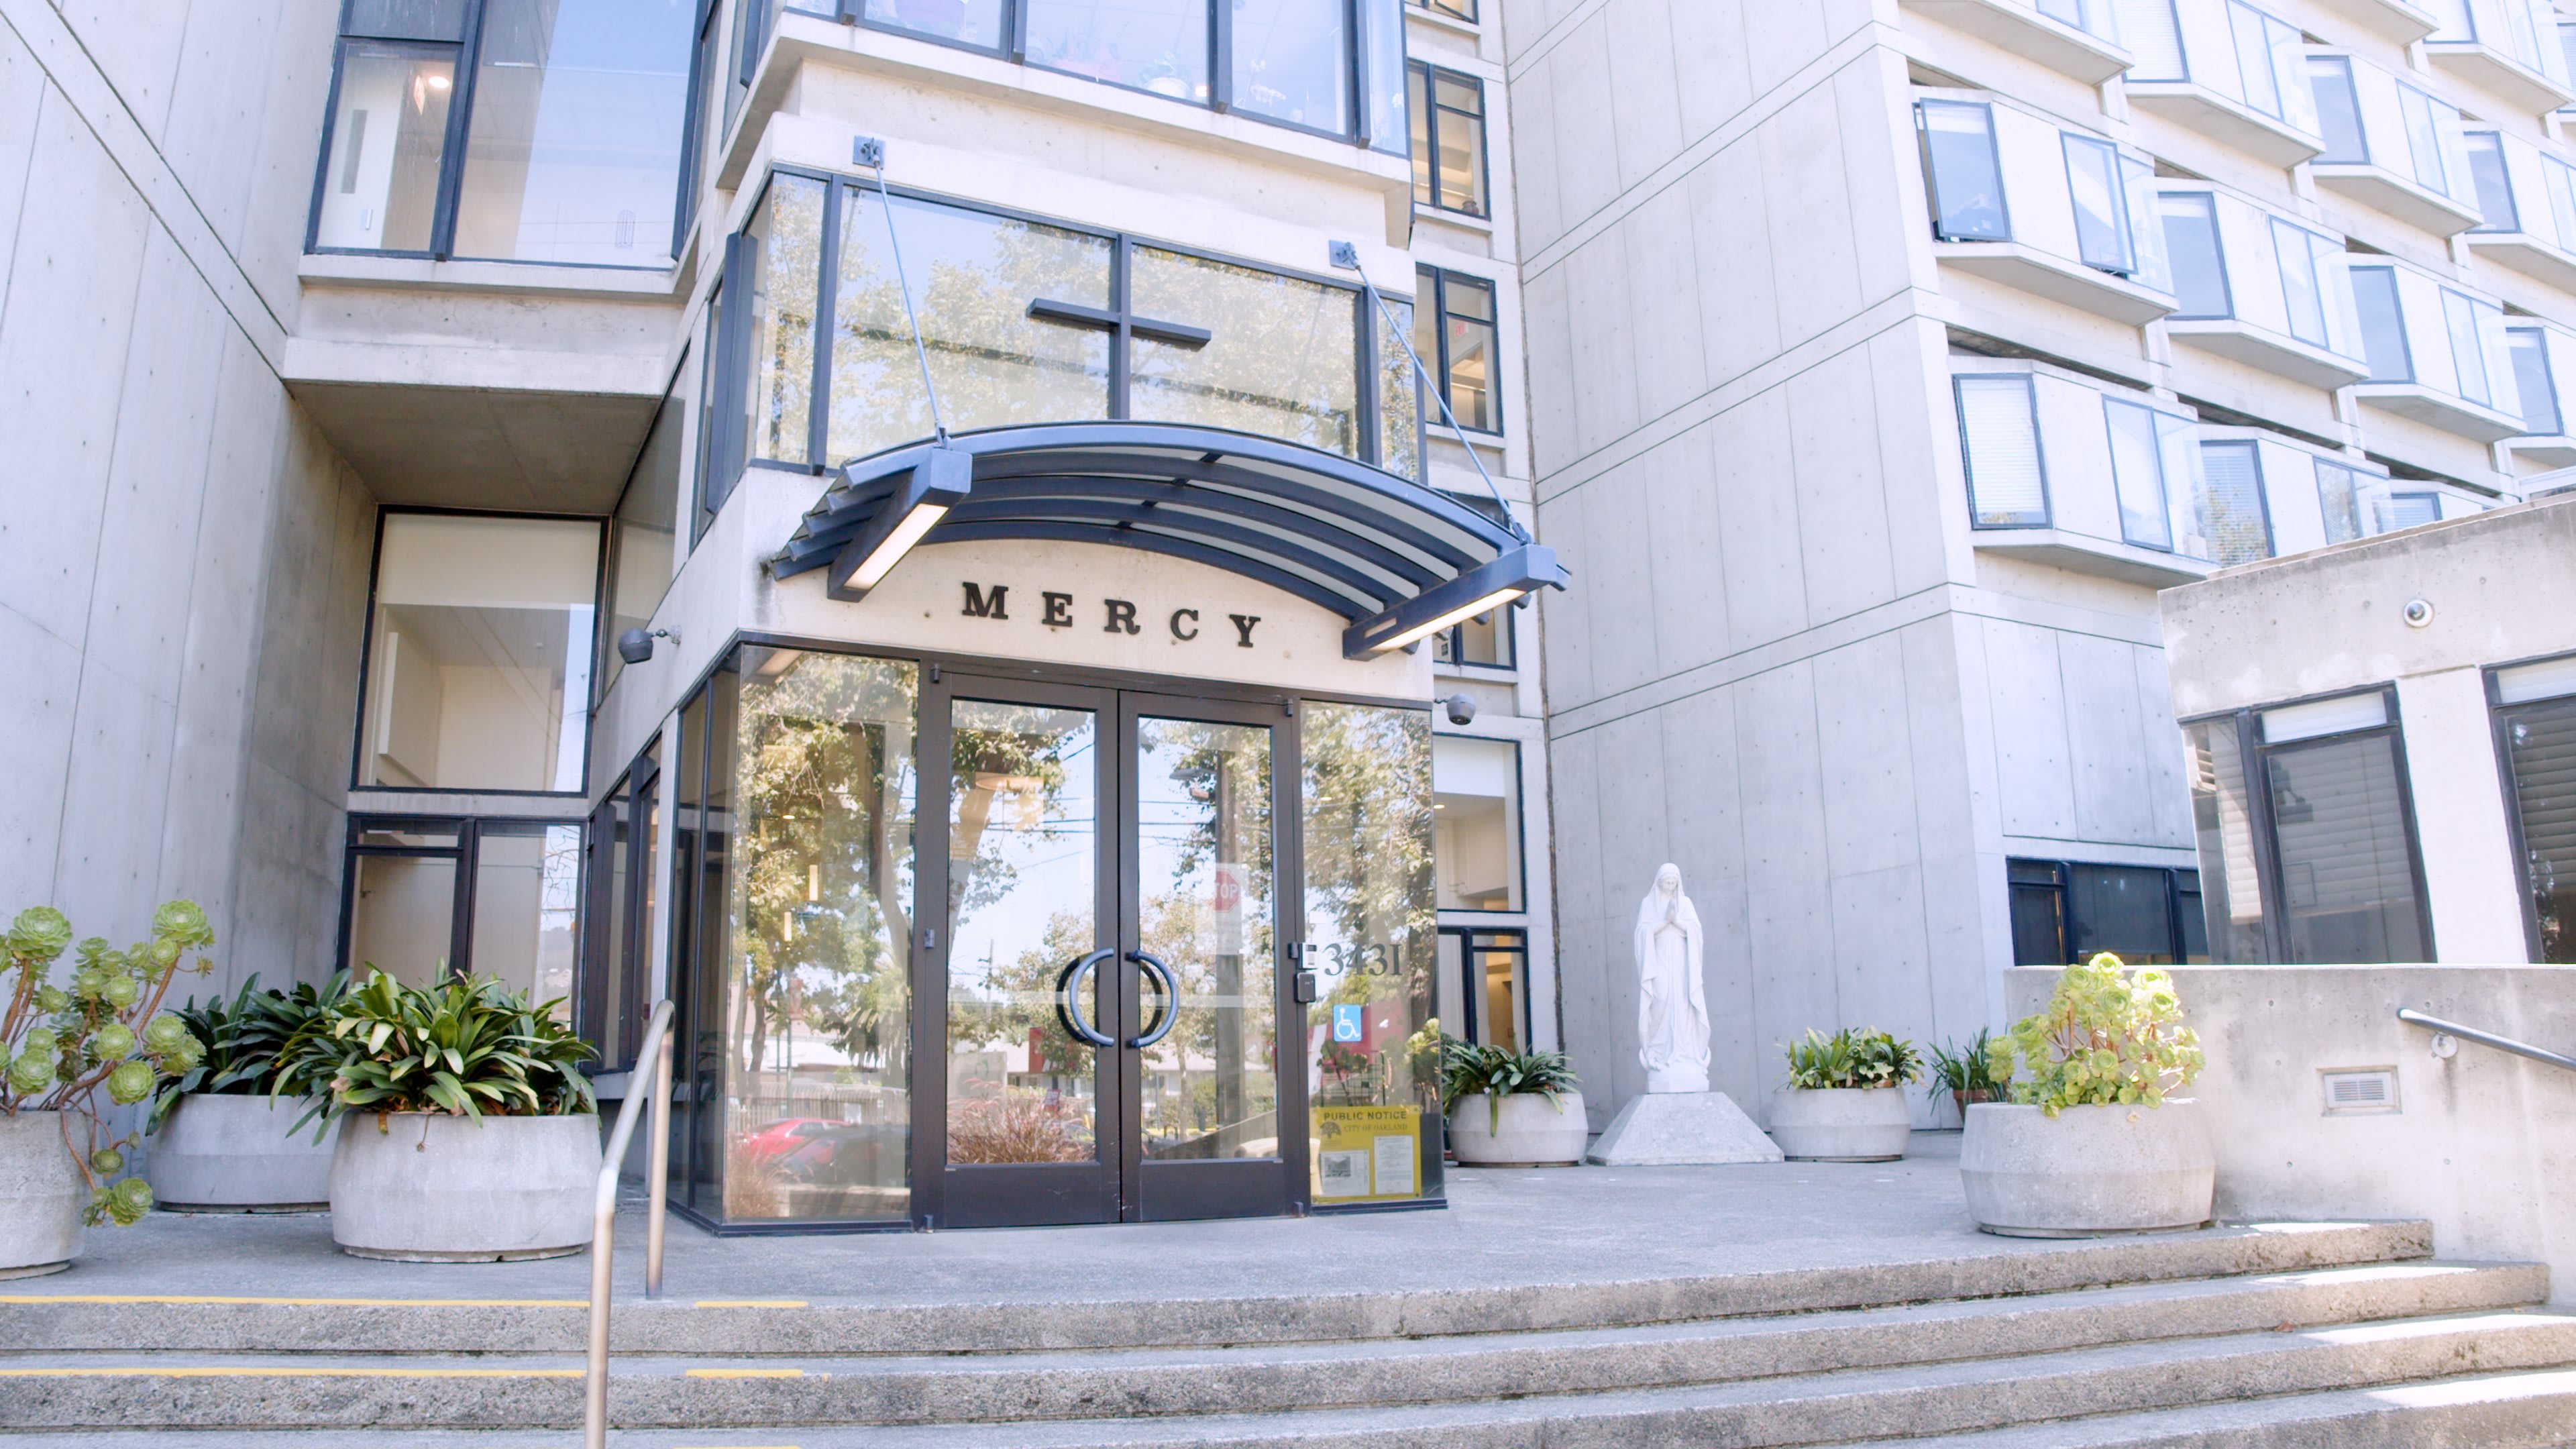 Mercy Retirement and Care Center